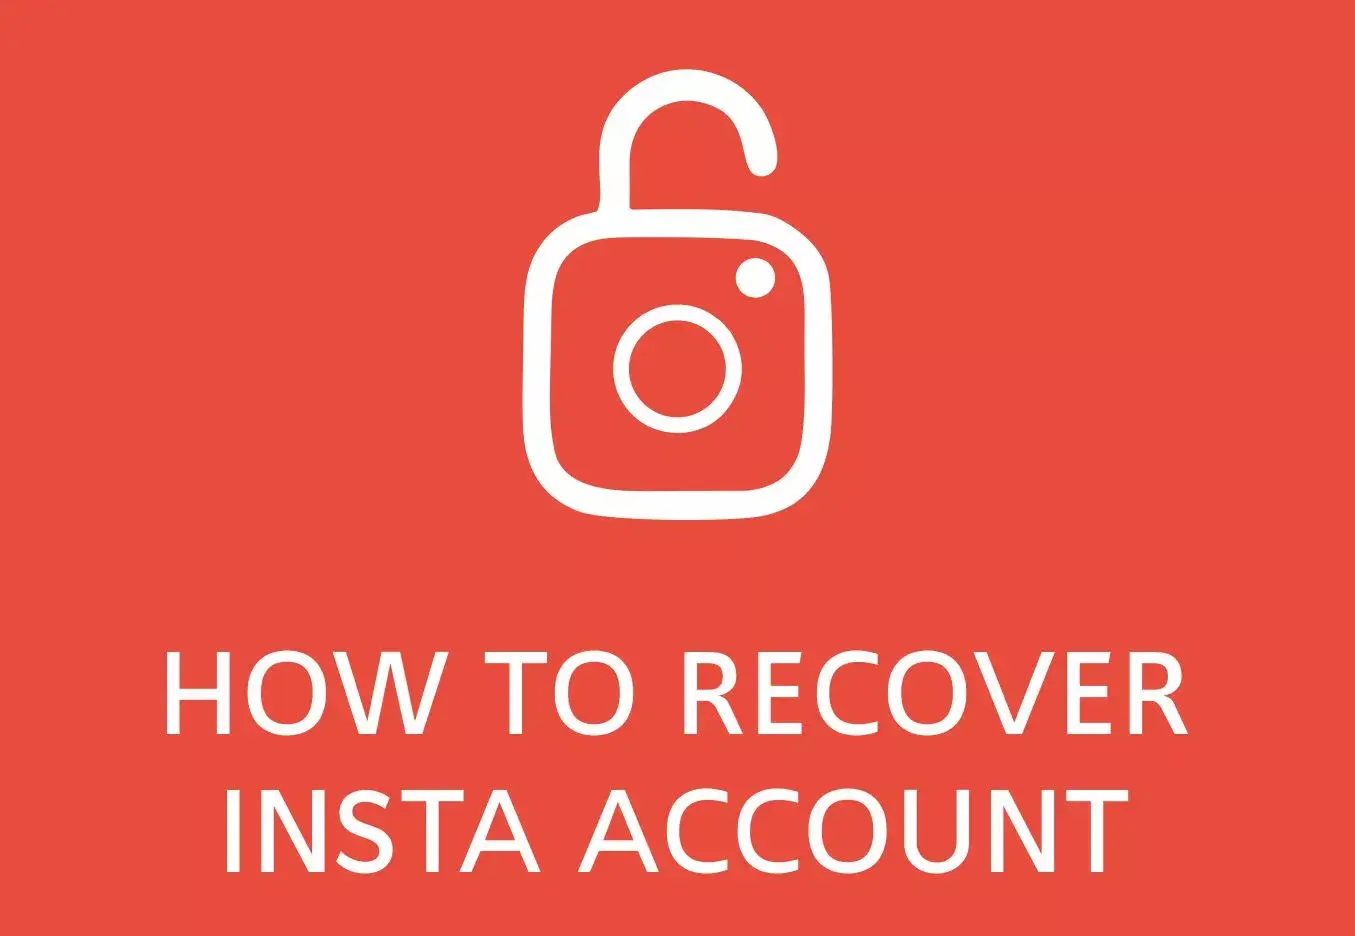 How to Recover Instagram account